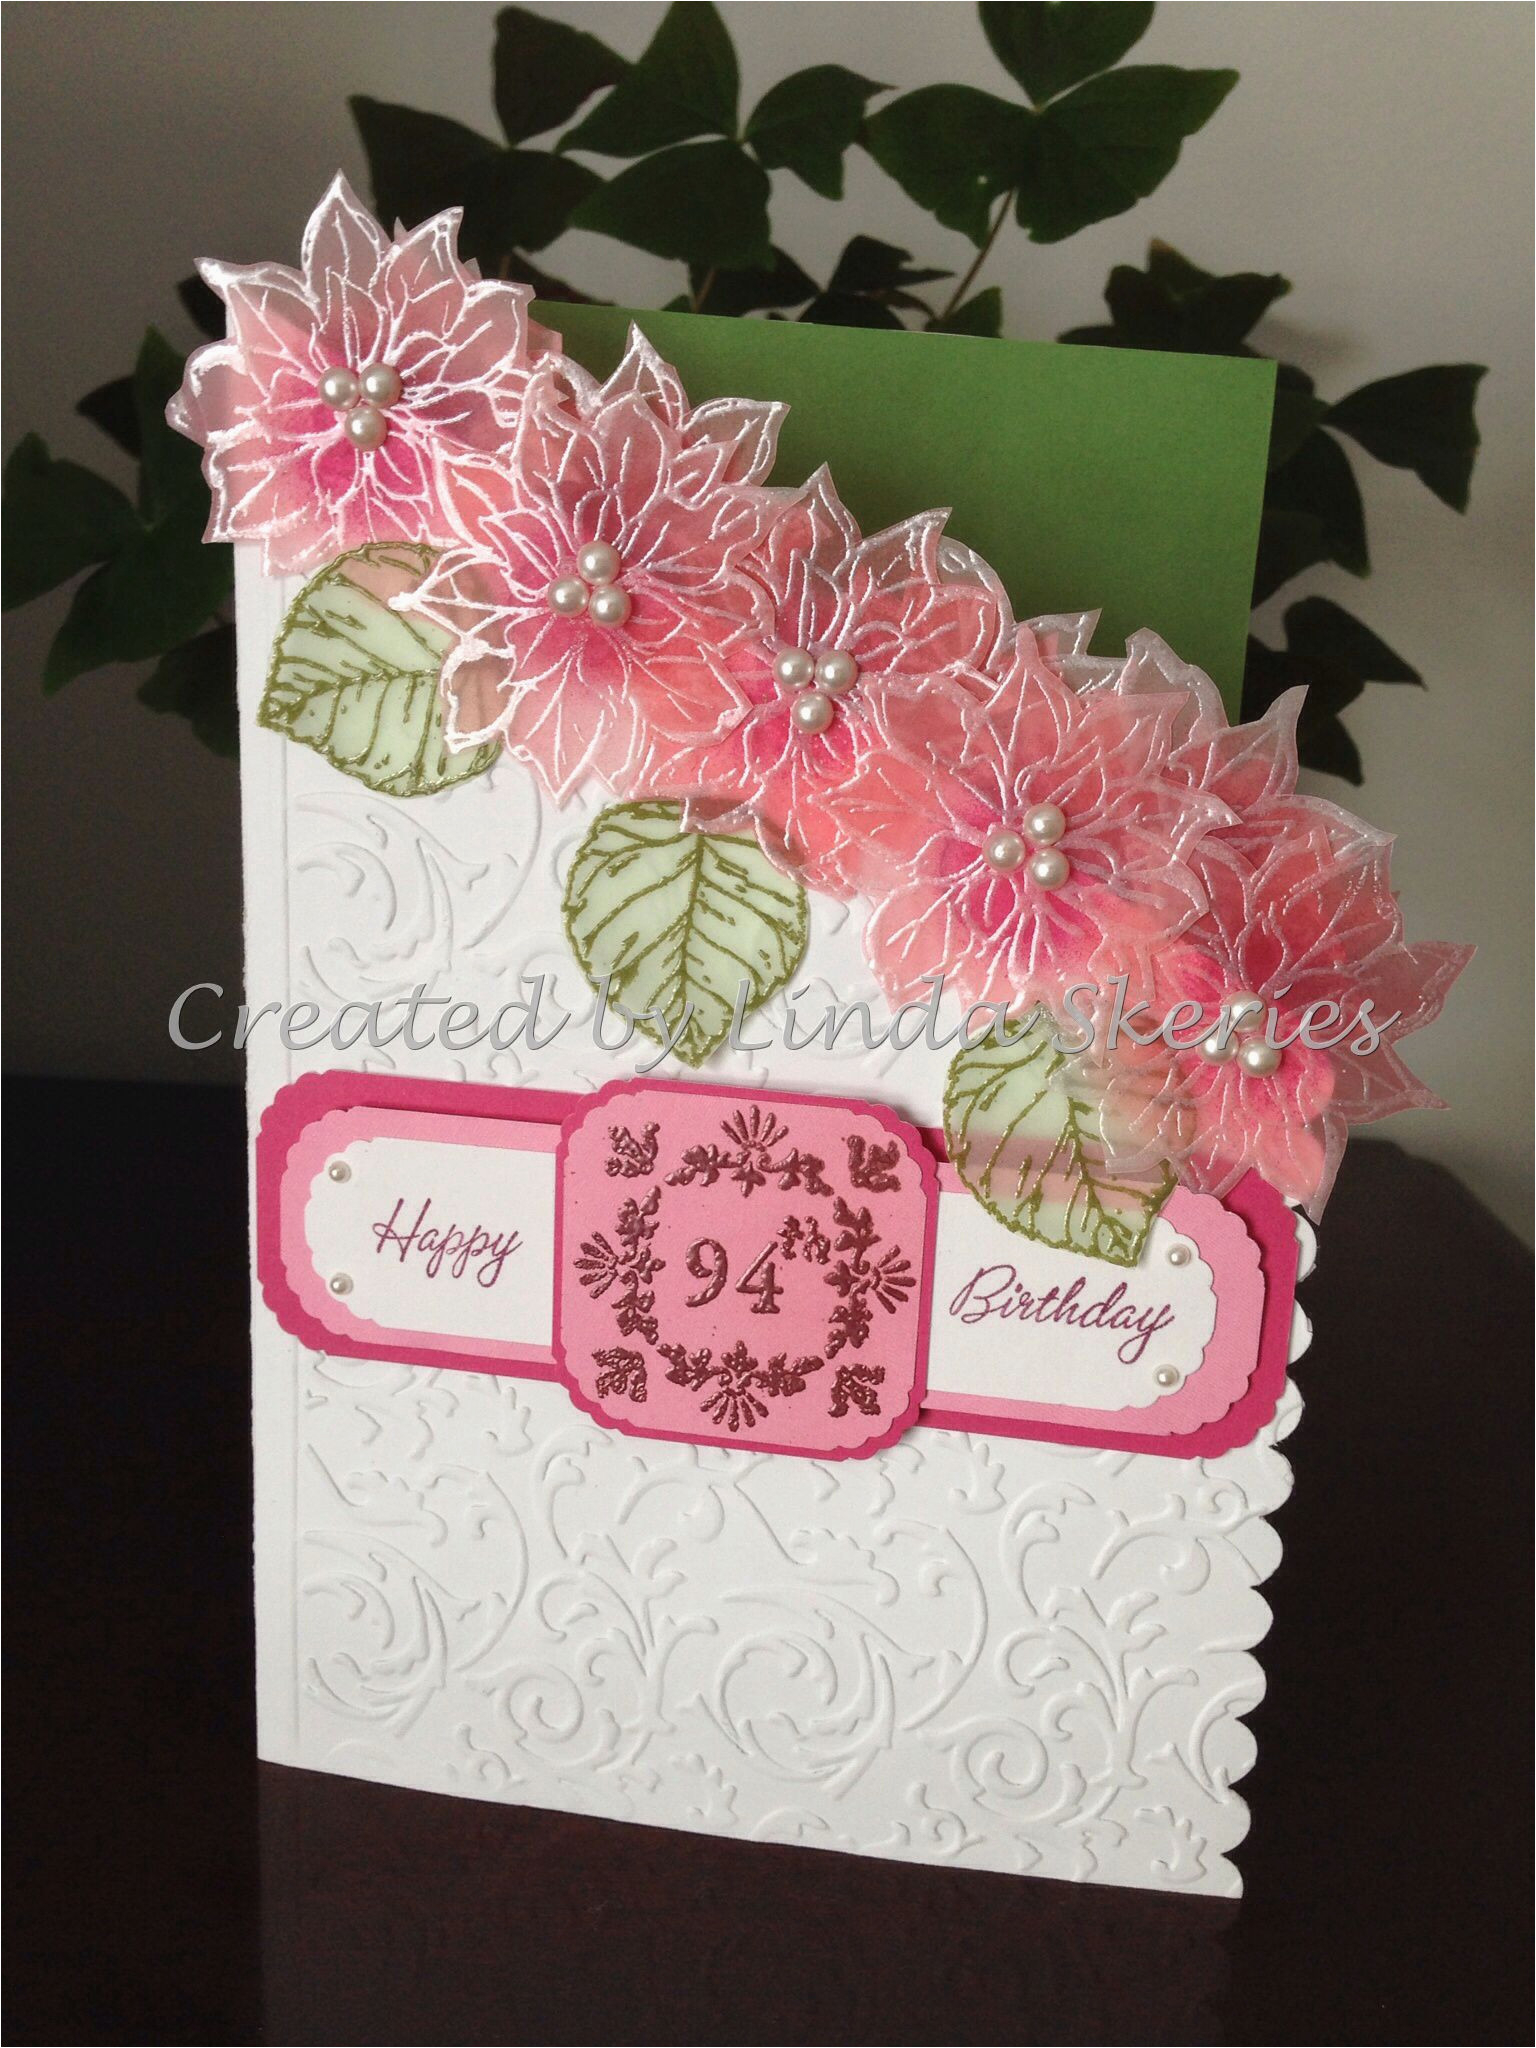 Embossed Birthday Card Ideas Diy Birthday Cards With Flowers A Special Birthday Card With